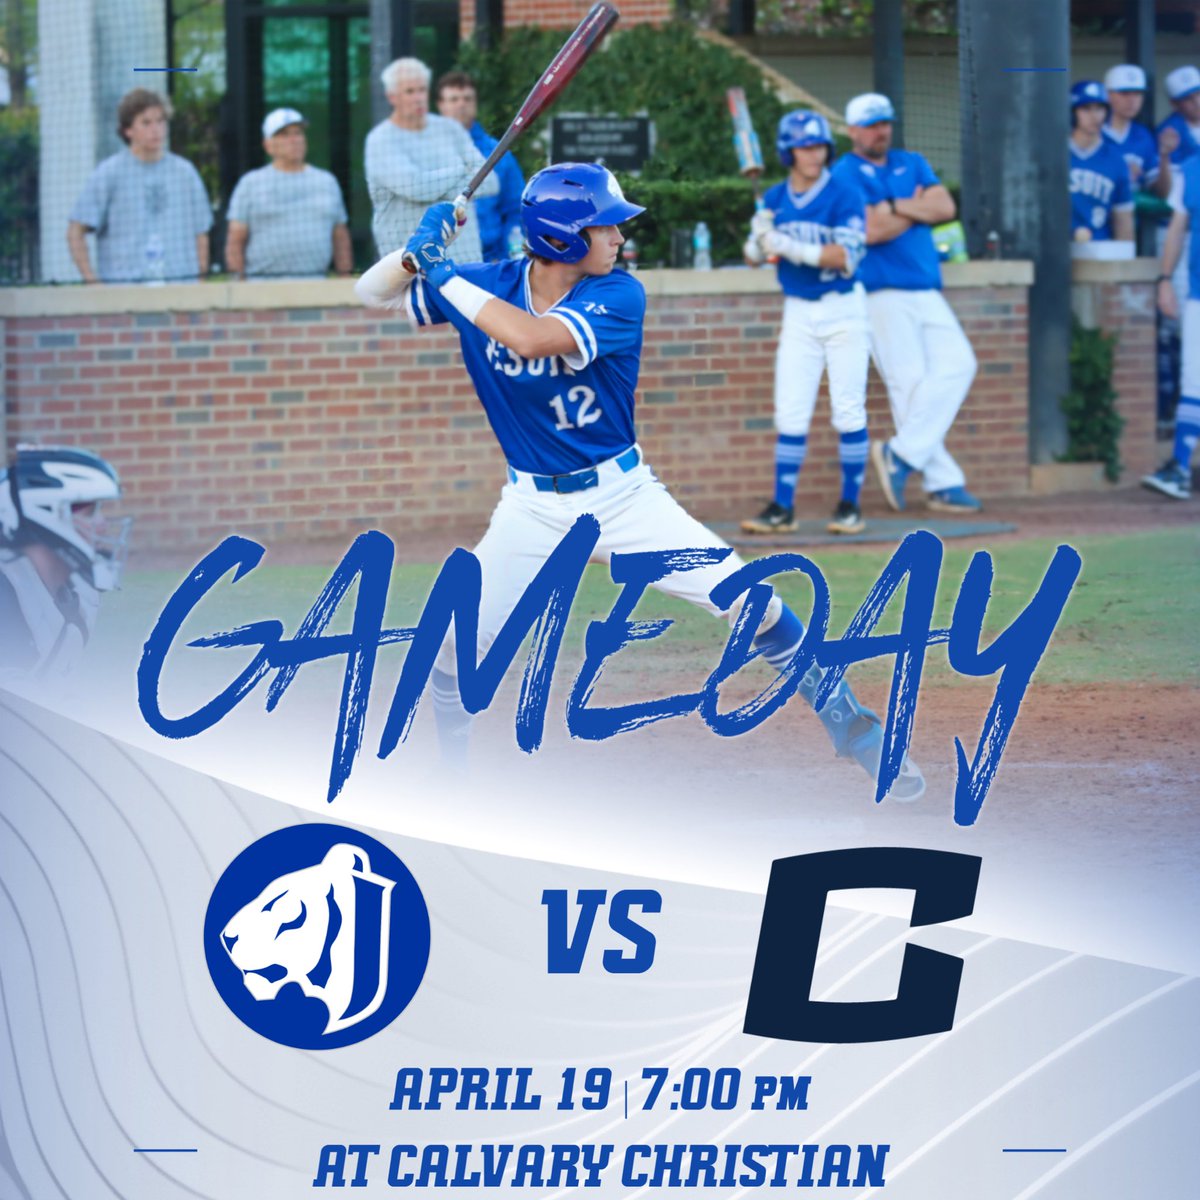 A big game on the road!   Jesuit baseball travels to face nationally ranked No. 7 Calvary Christian. Go Tigers!   If you can't travel to watch the game, the NFHS Network will be livestreaming the game. Click the link below to watch:   nfhsnetwork.com/events/calvary…   #AMDG #GoTigers